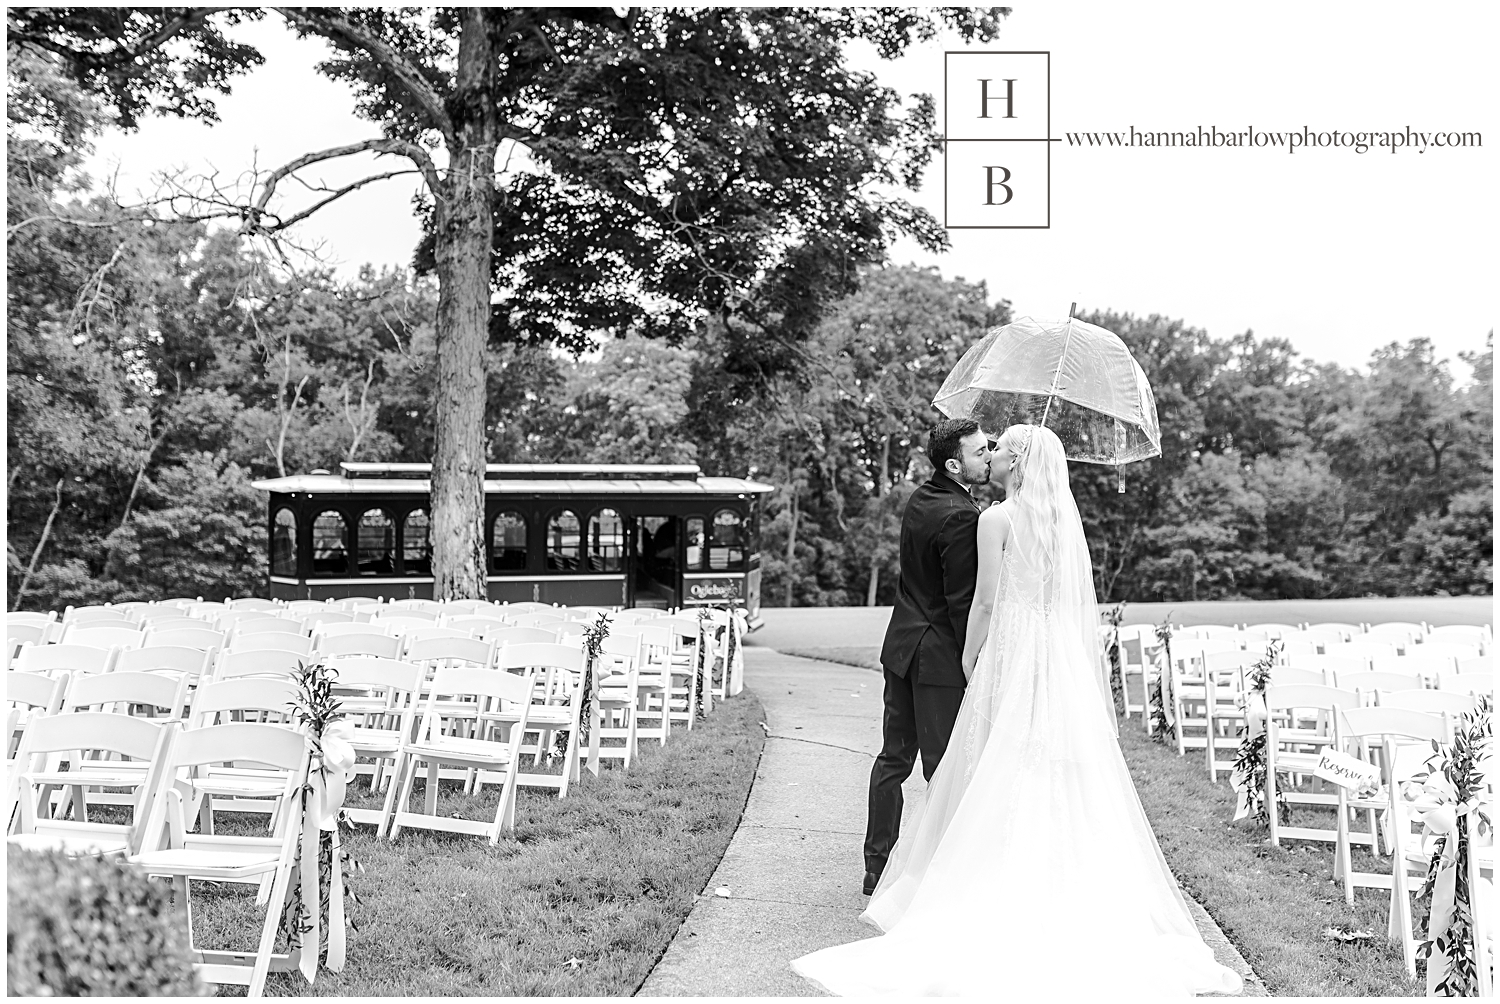 Groom carries umbrella over bride as they walk and kiss.